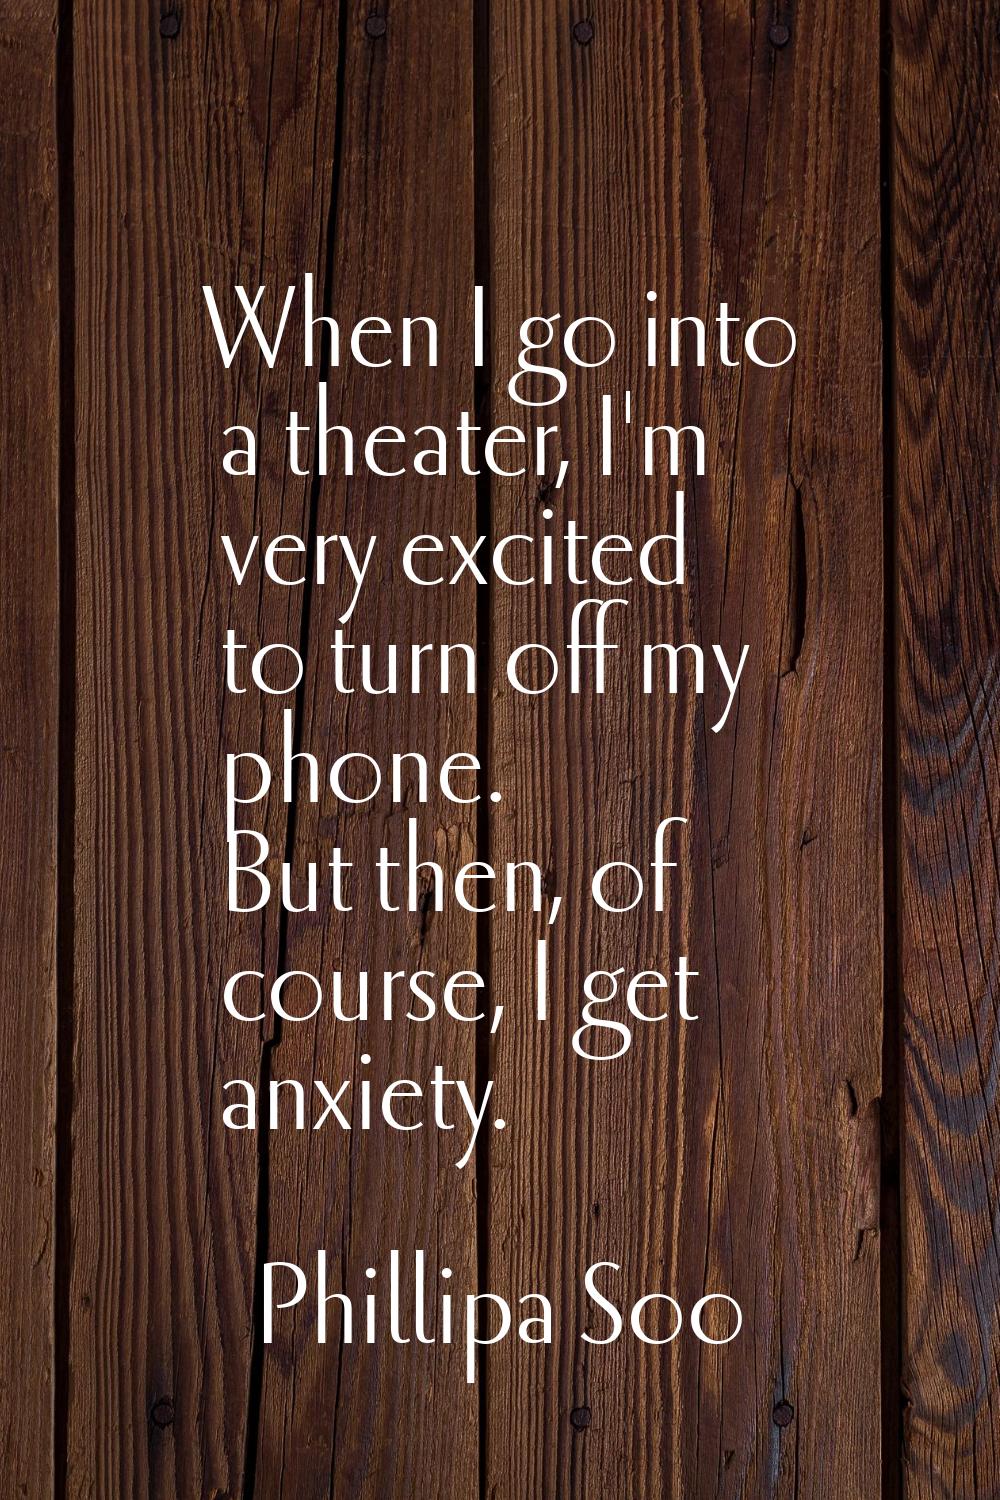 When I go into a theater, I'm very excited to turn off my phone. But then, of course, I get anxiety